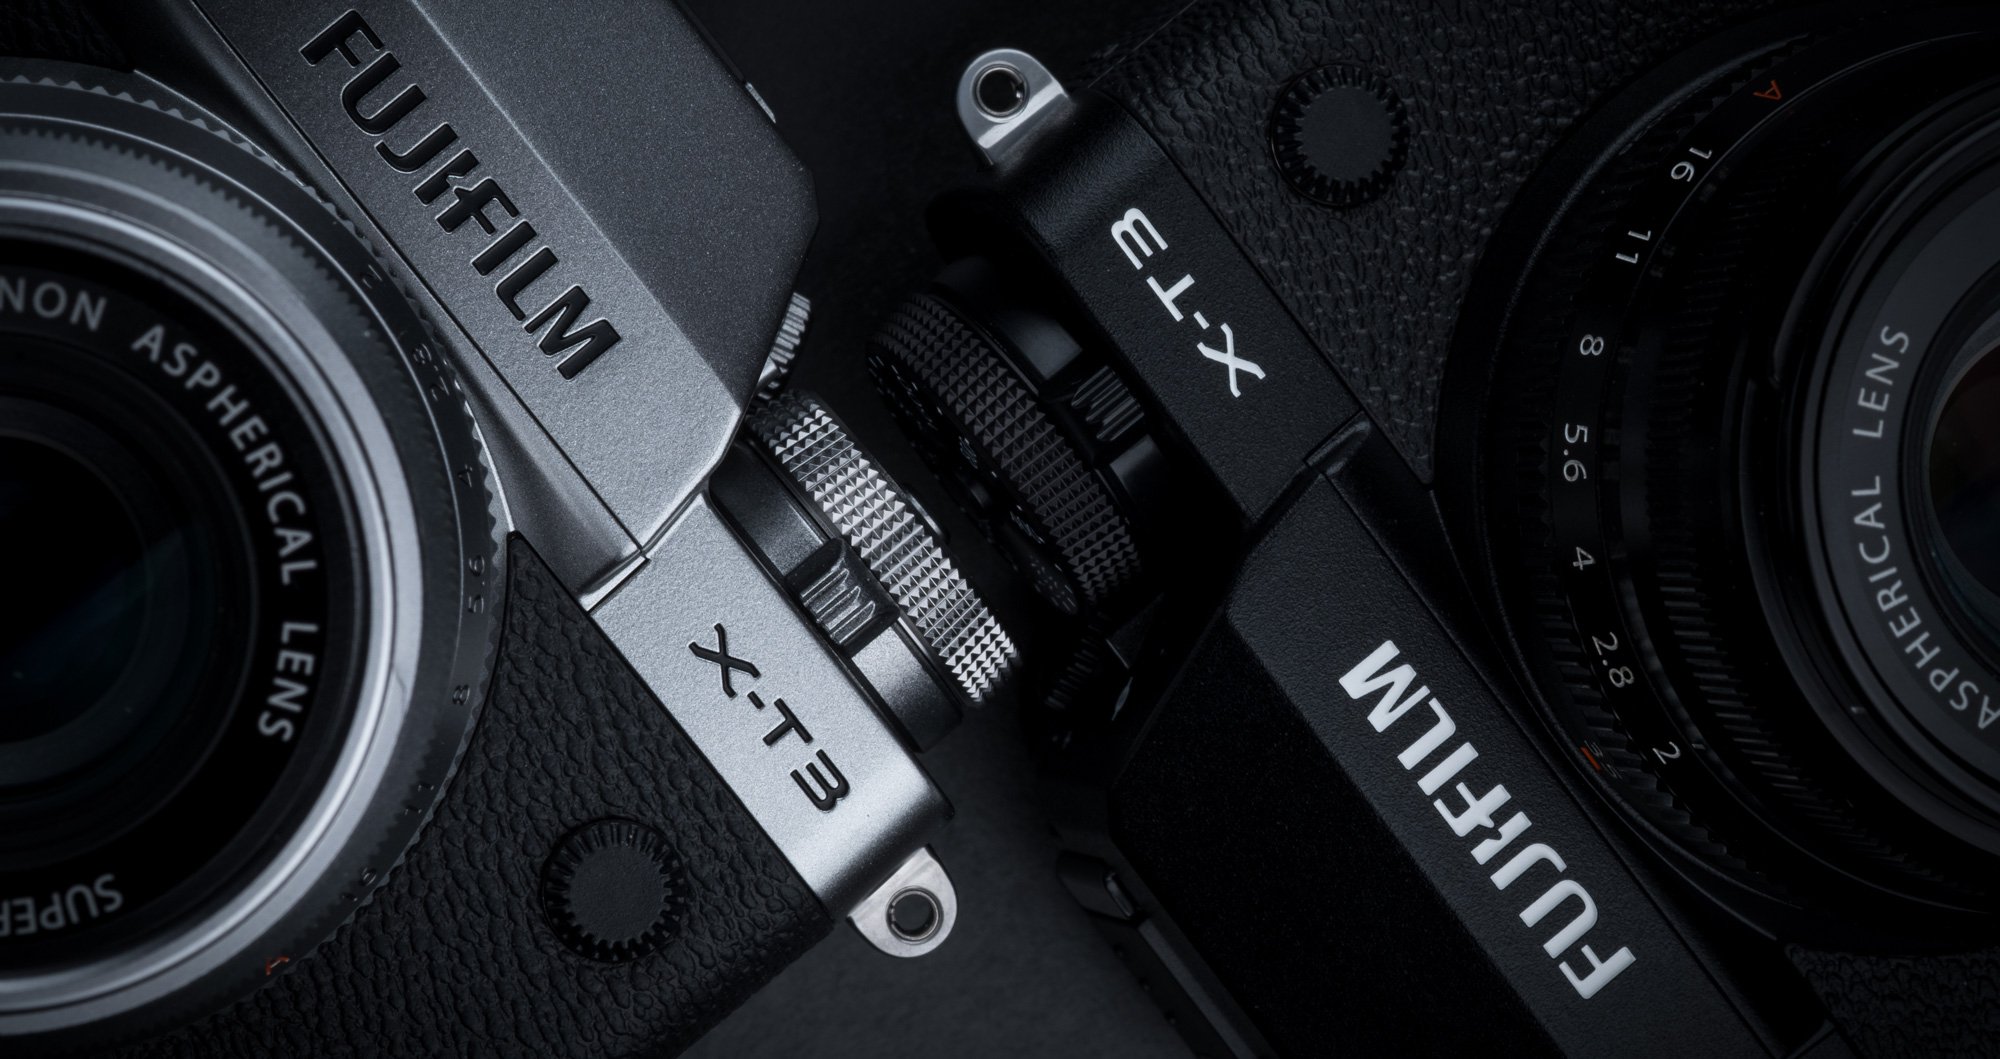 Post Banner for Fujifilm X-T3 to Receive Firmware Ver 4.0 that Improves Its Autofocus Performance